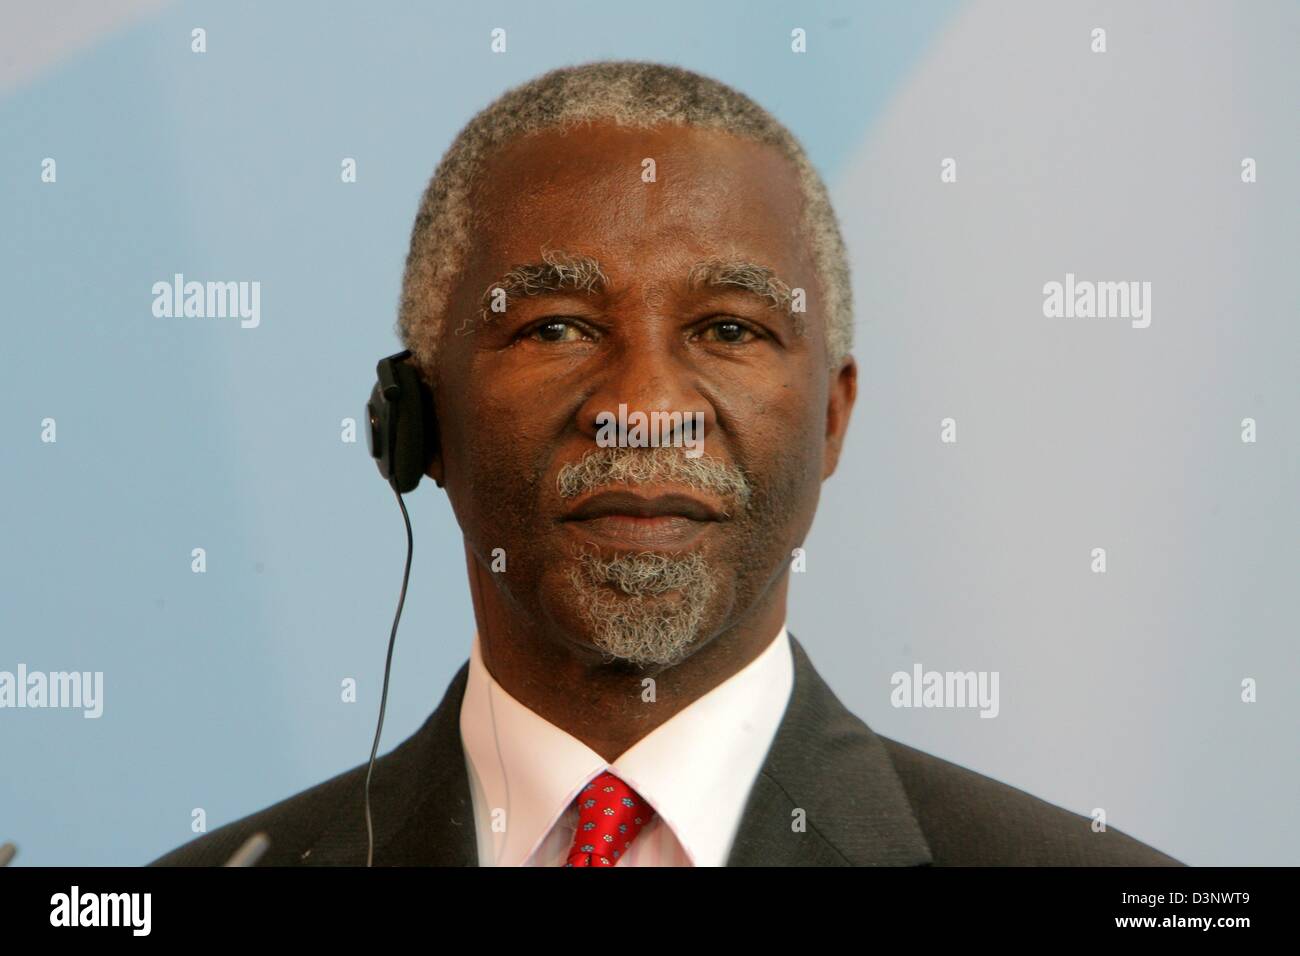 President of South Africa Thabo Mbeki is pictured during a press conference in Berlin, Germany, Saturday, 08 July 2006. Photo: Tim Brakemeier Stock Photo